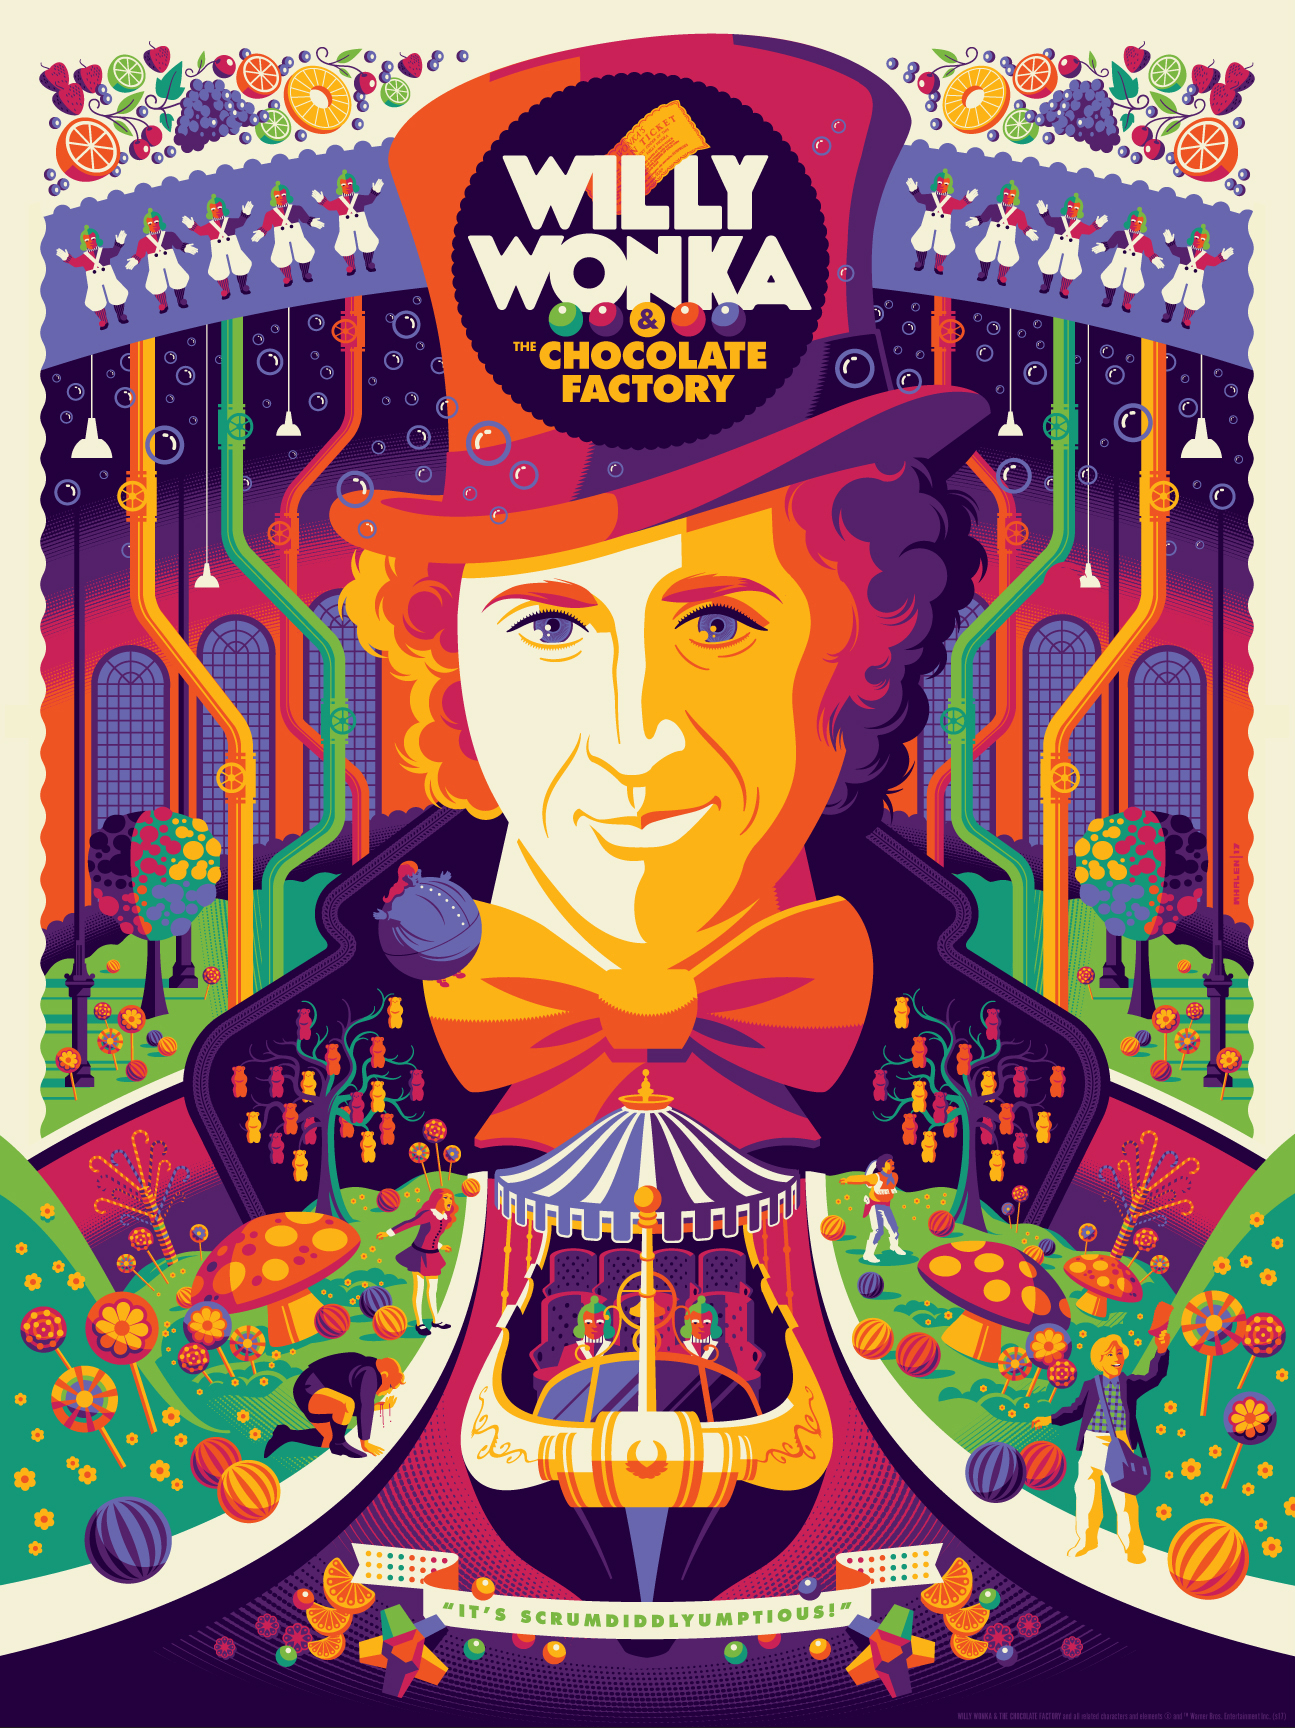 This Willy Wonka Poster Is As Colourful And Manic As The Movie Itself